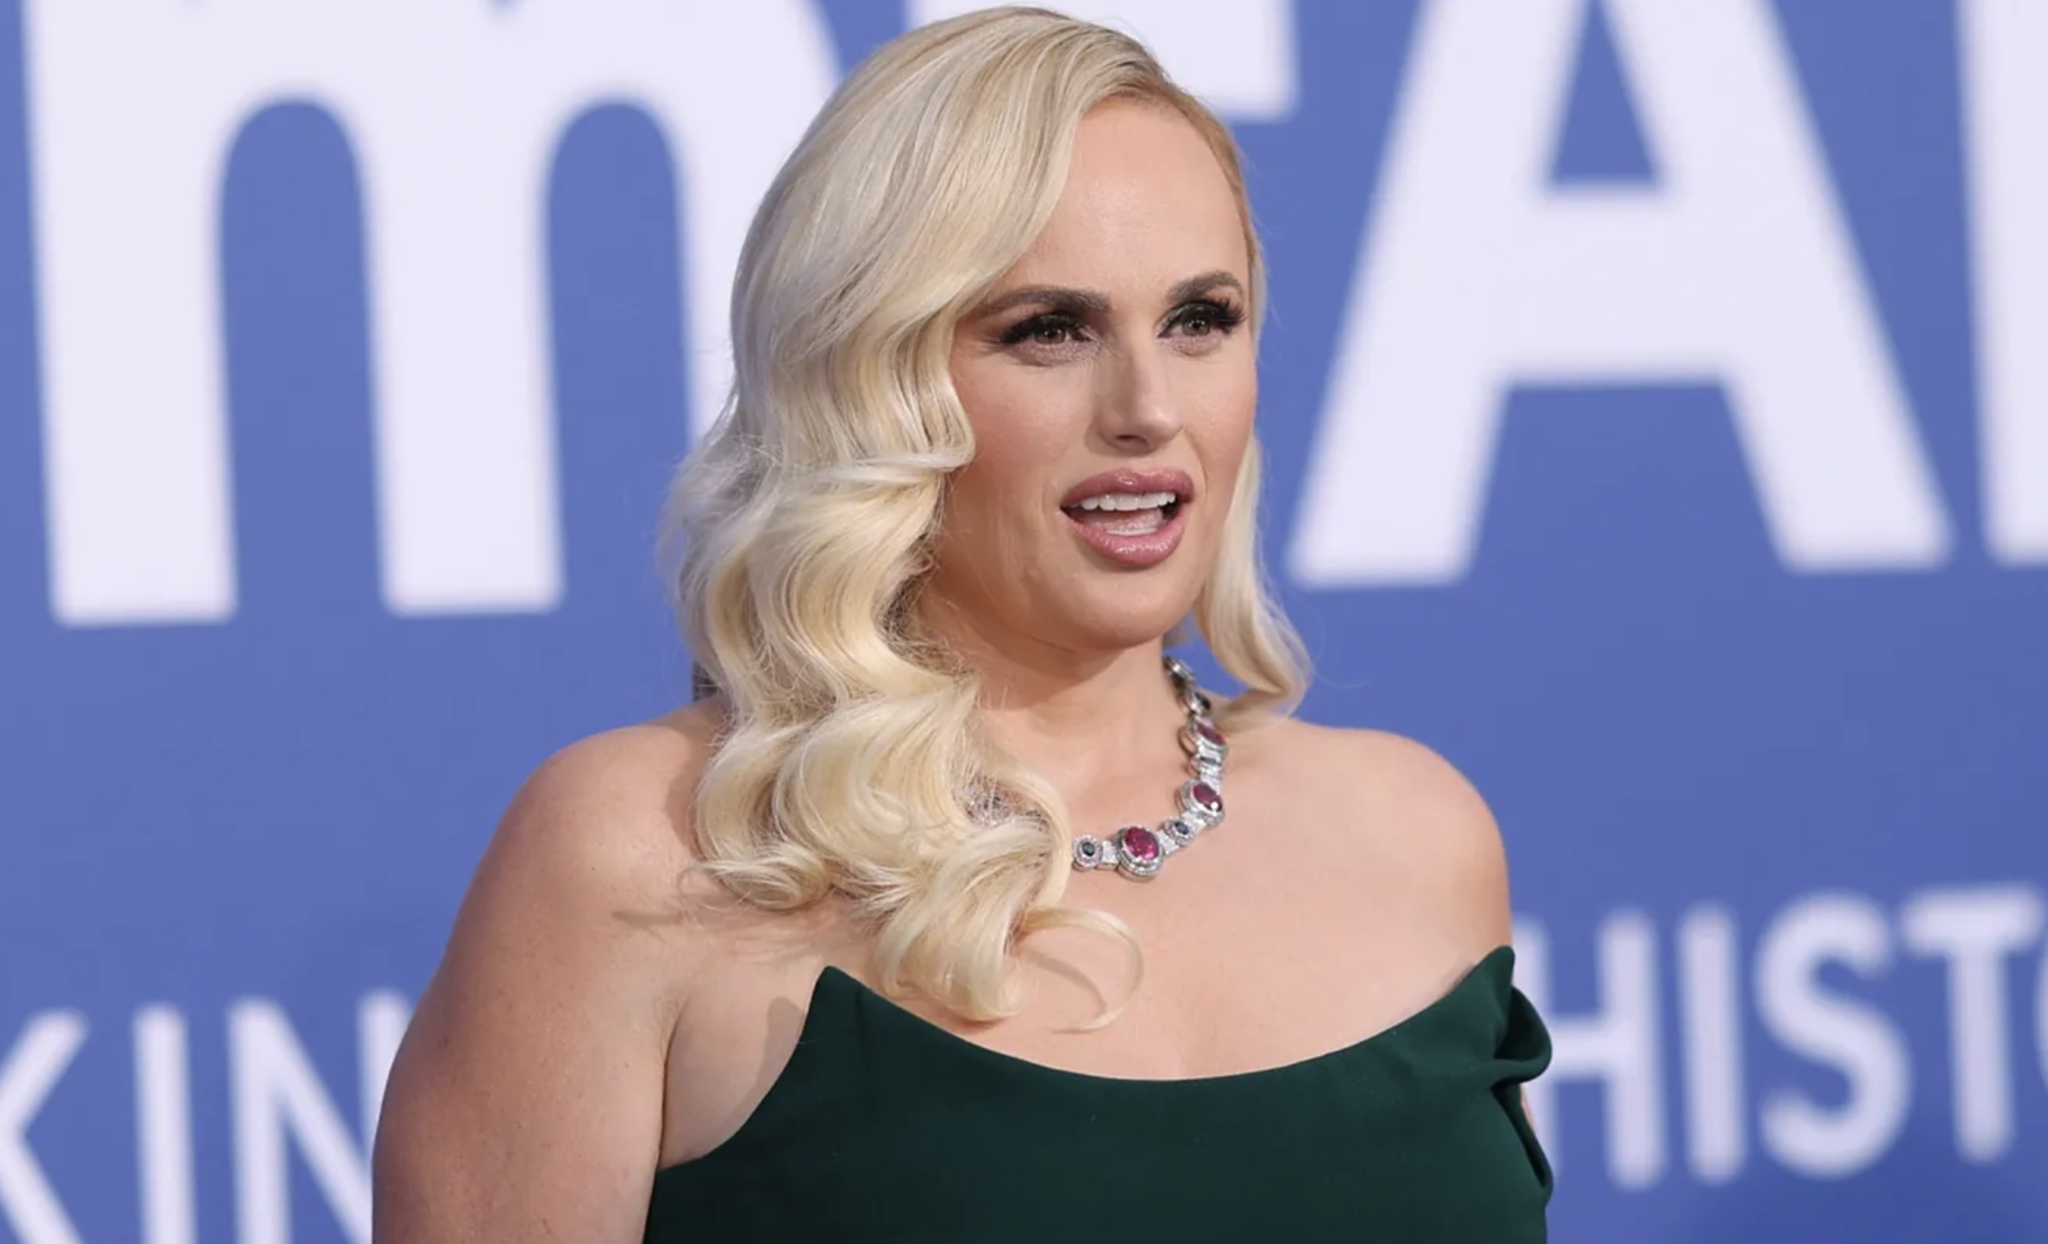 Rebel Wilson claims an unnamed Royal invited her to a drug-fueled orgy